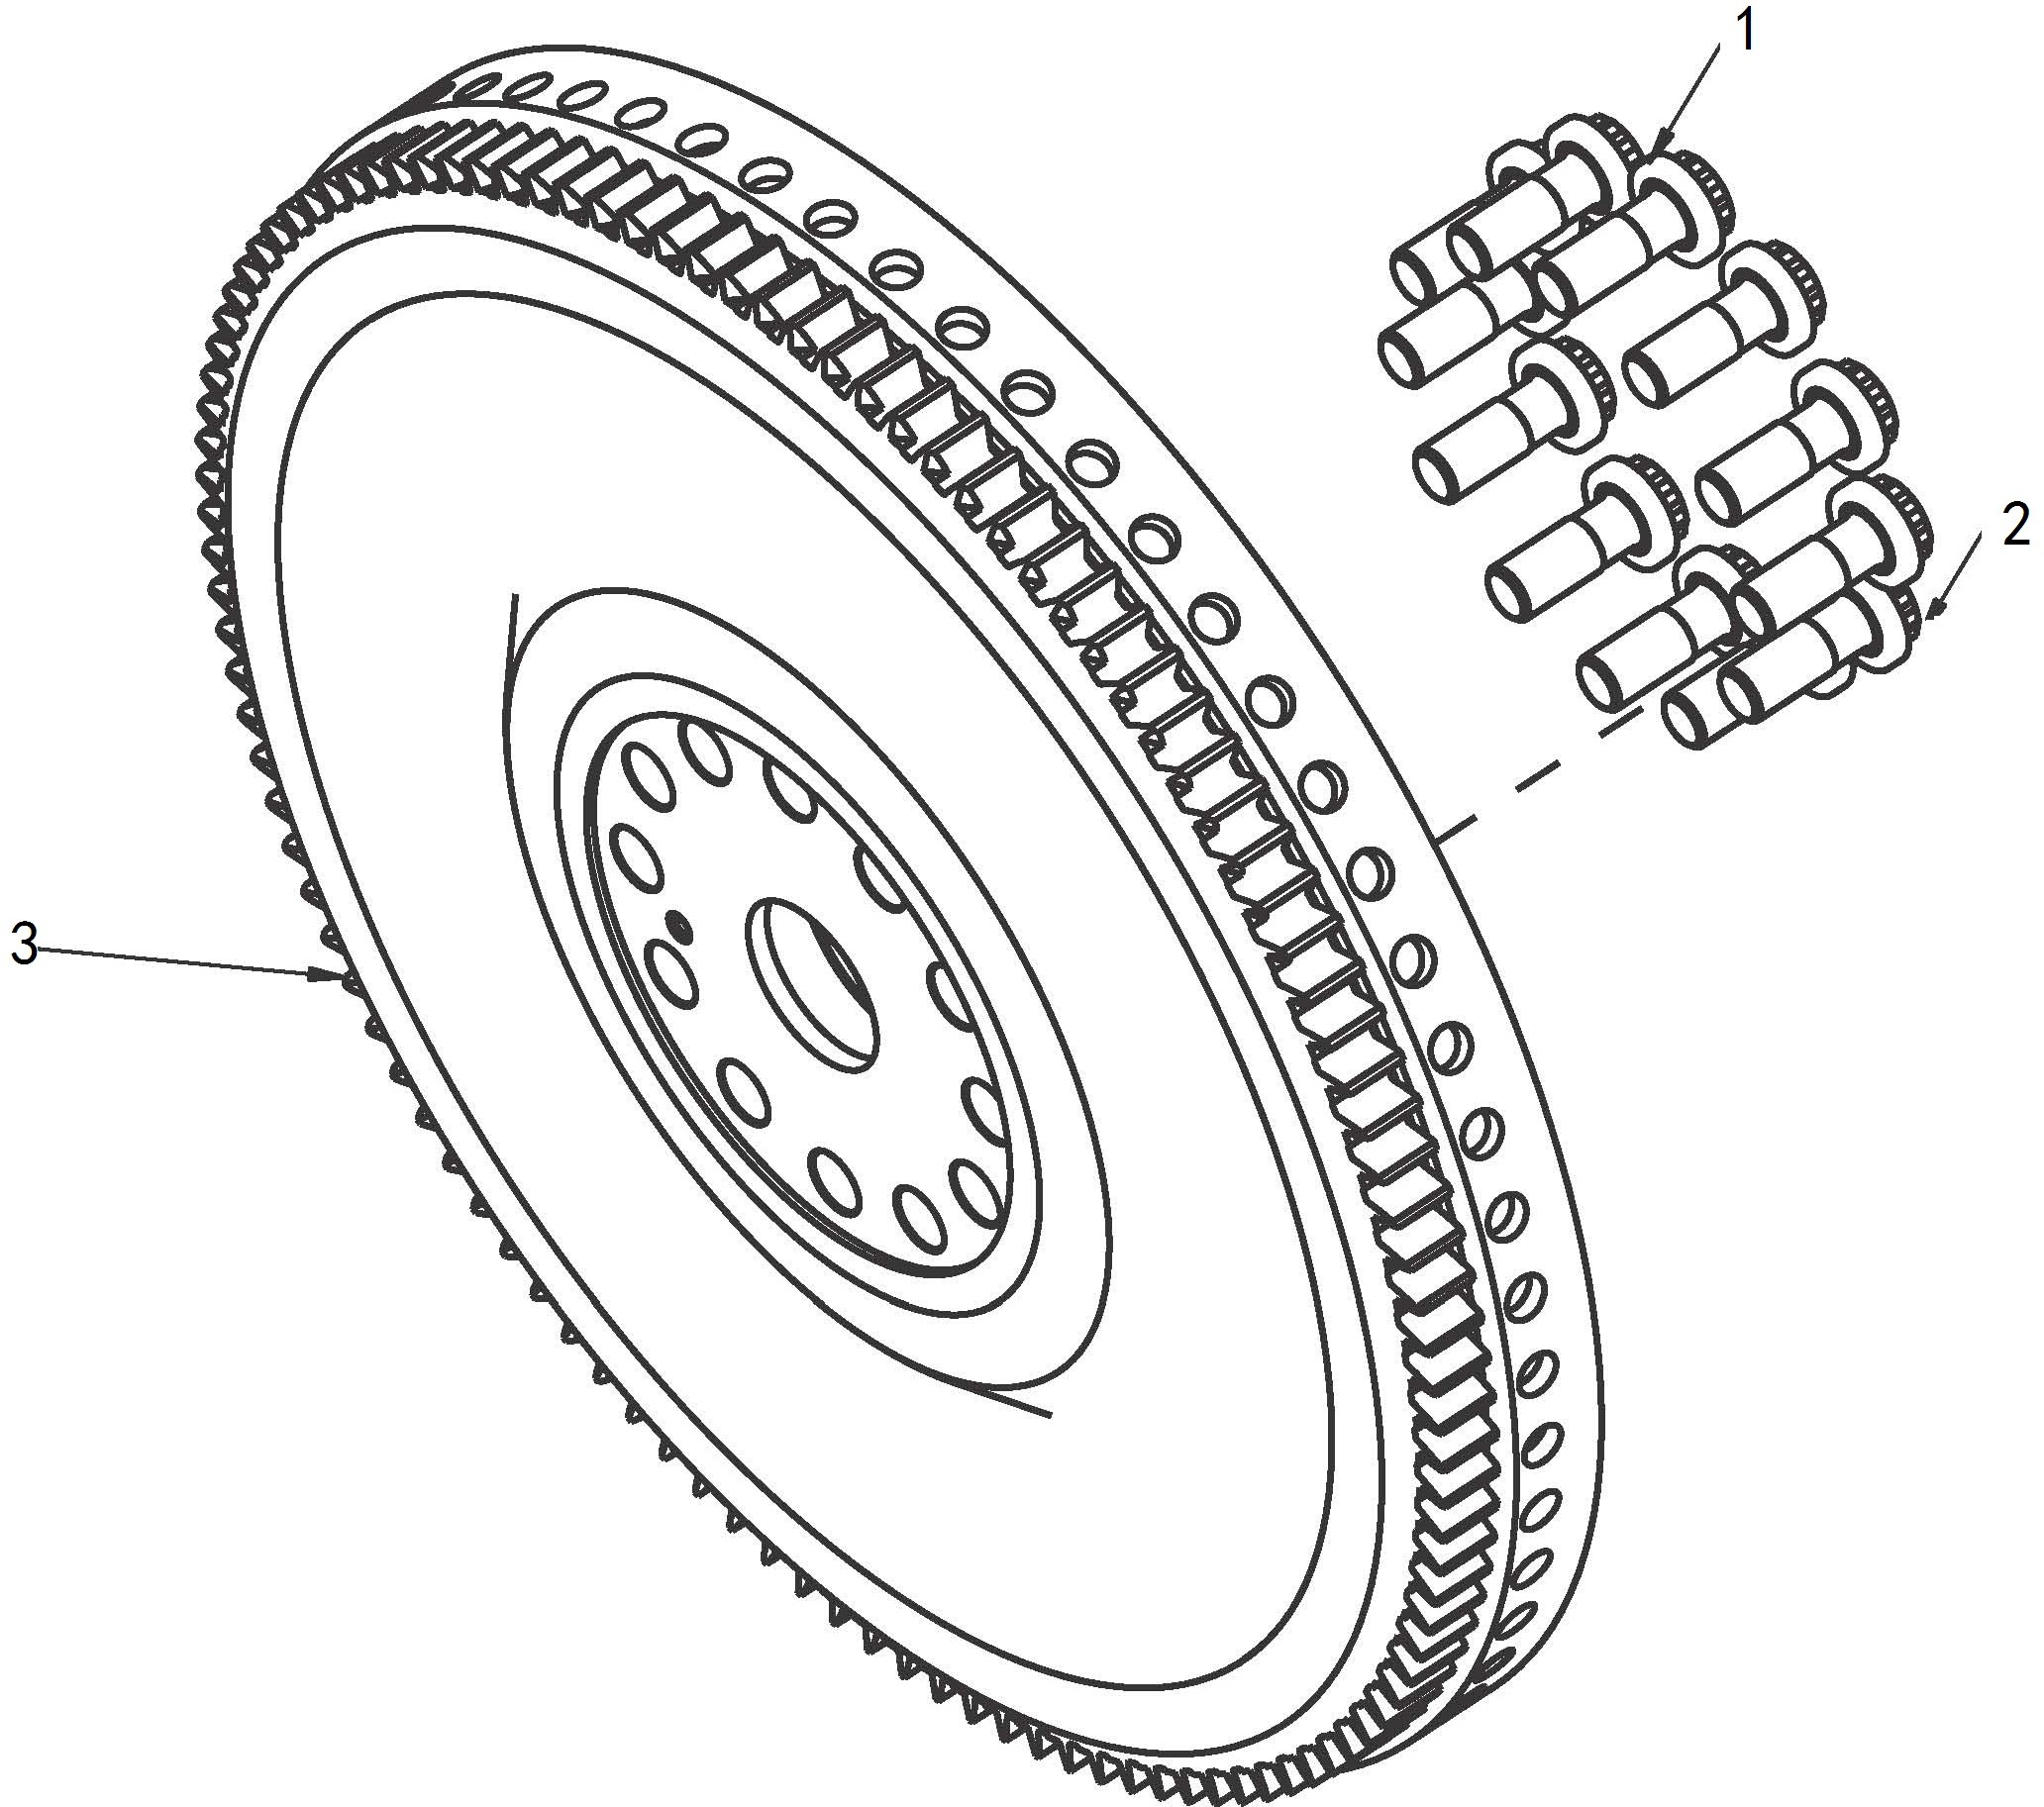 FW 2375, FLY WHEEL, DONGFENG PARTS